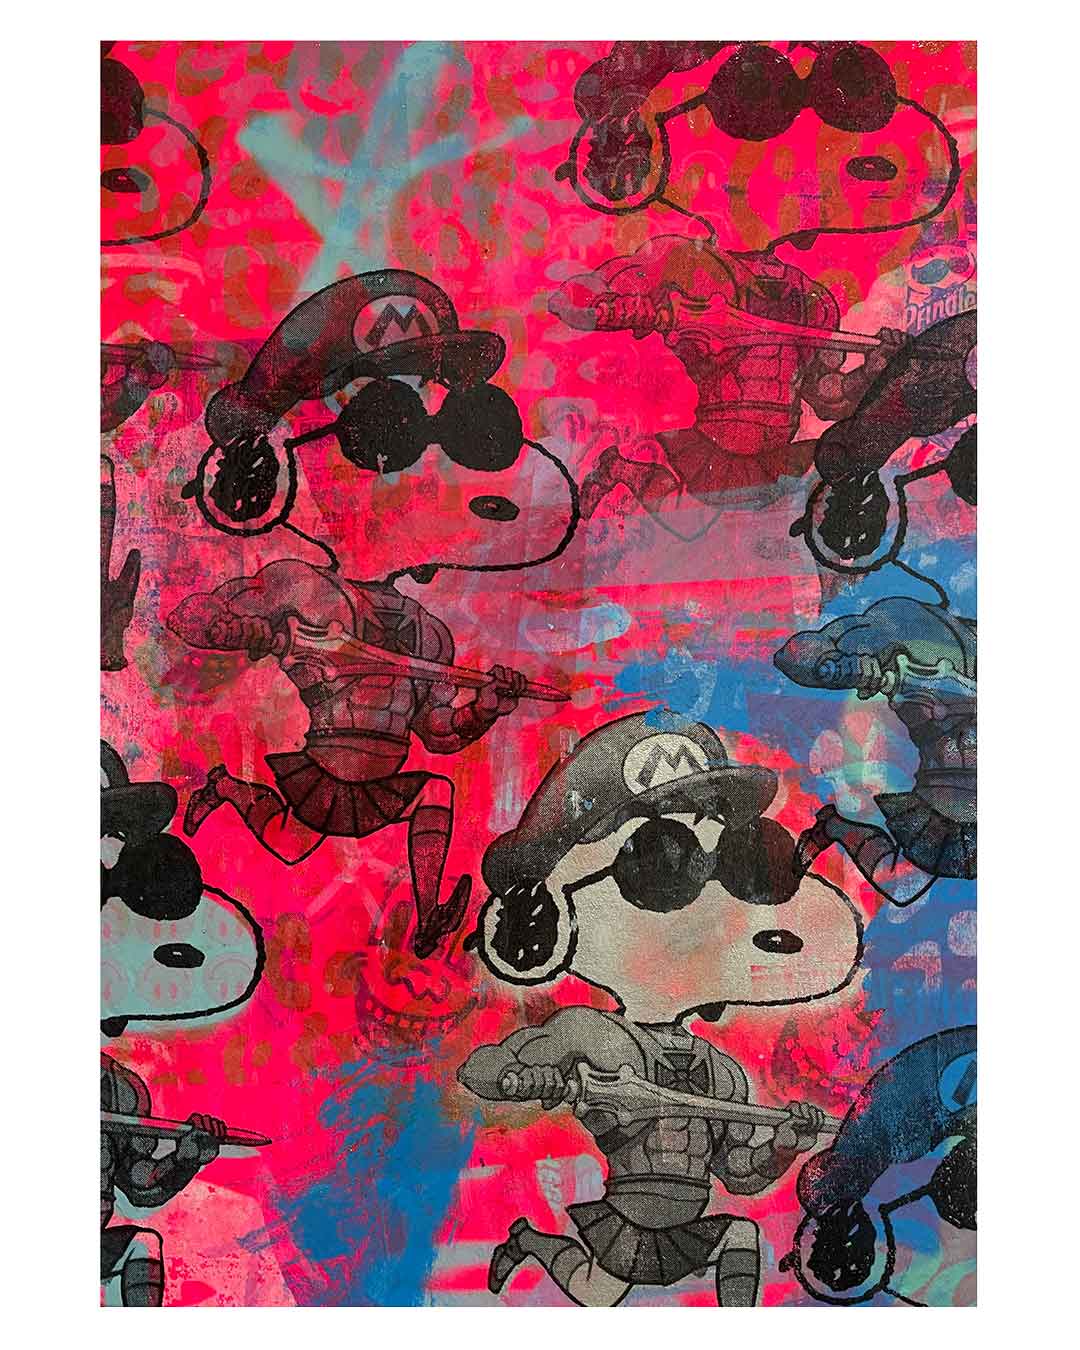 Dude Goes Crazy Painting by Barrie J Davies 2023, Mixed media on Canvas, 50cm x 75cm, Unframed and ready to hang.